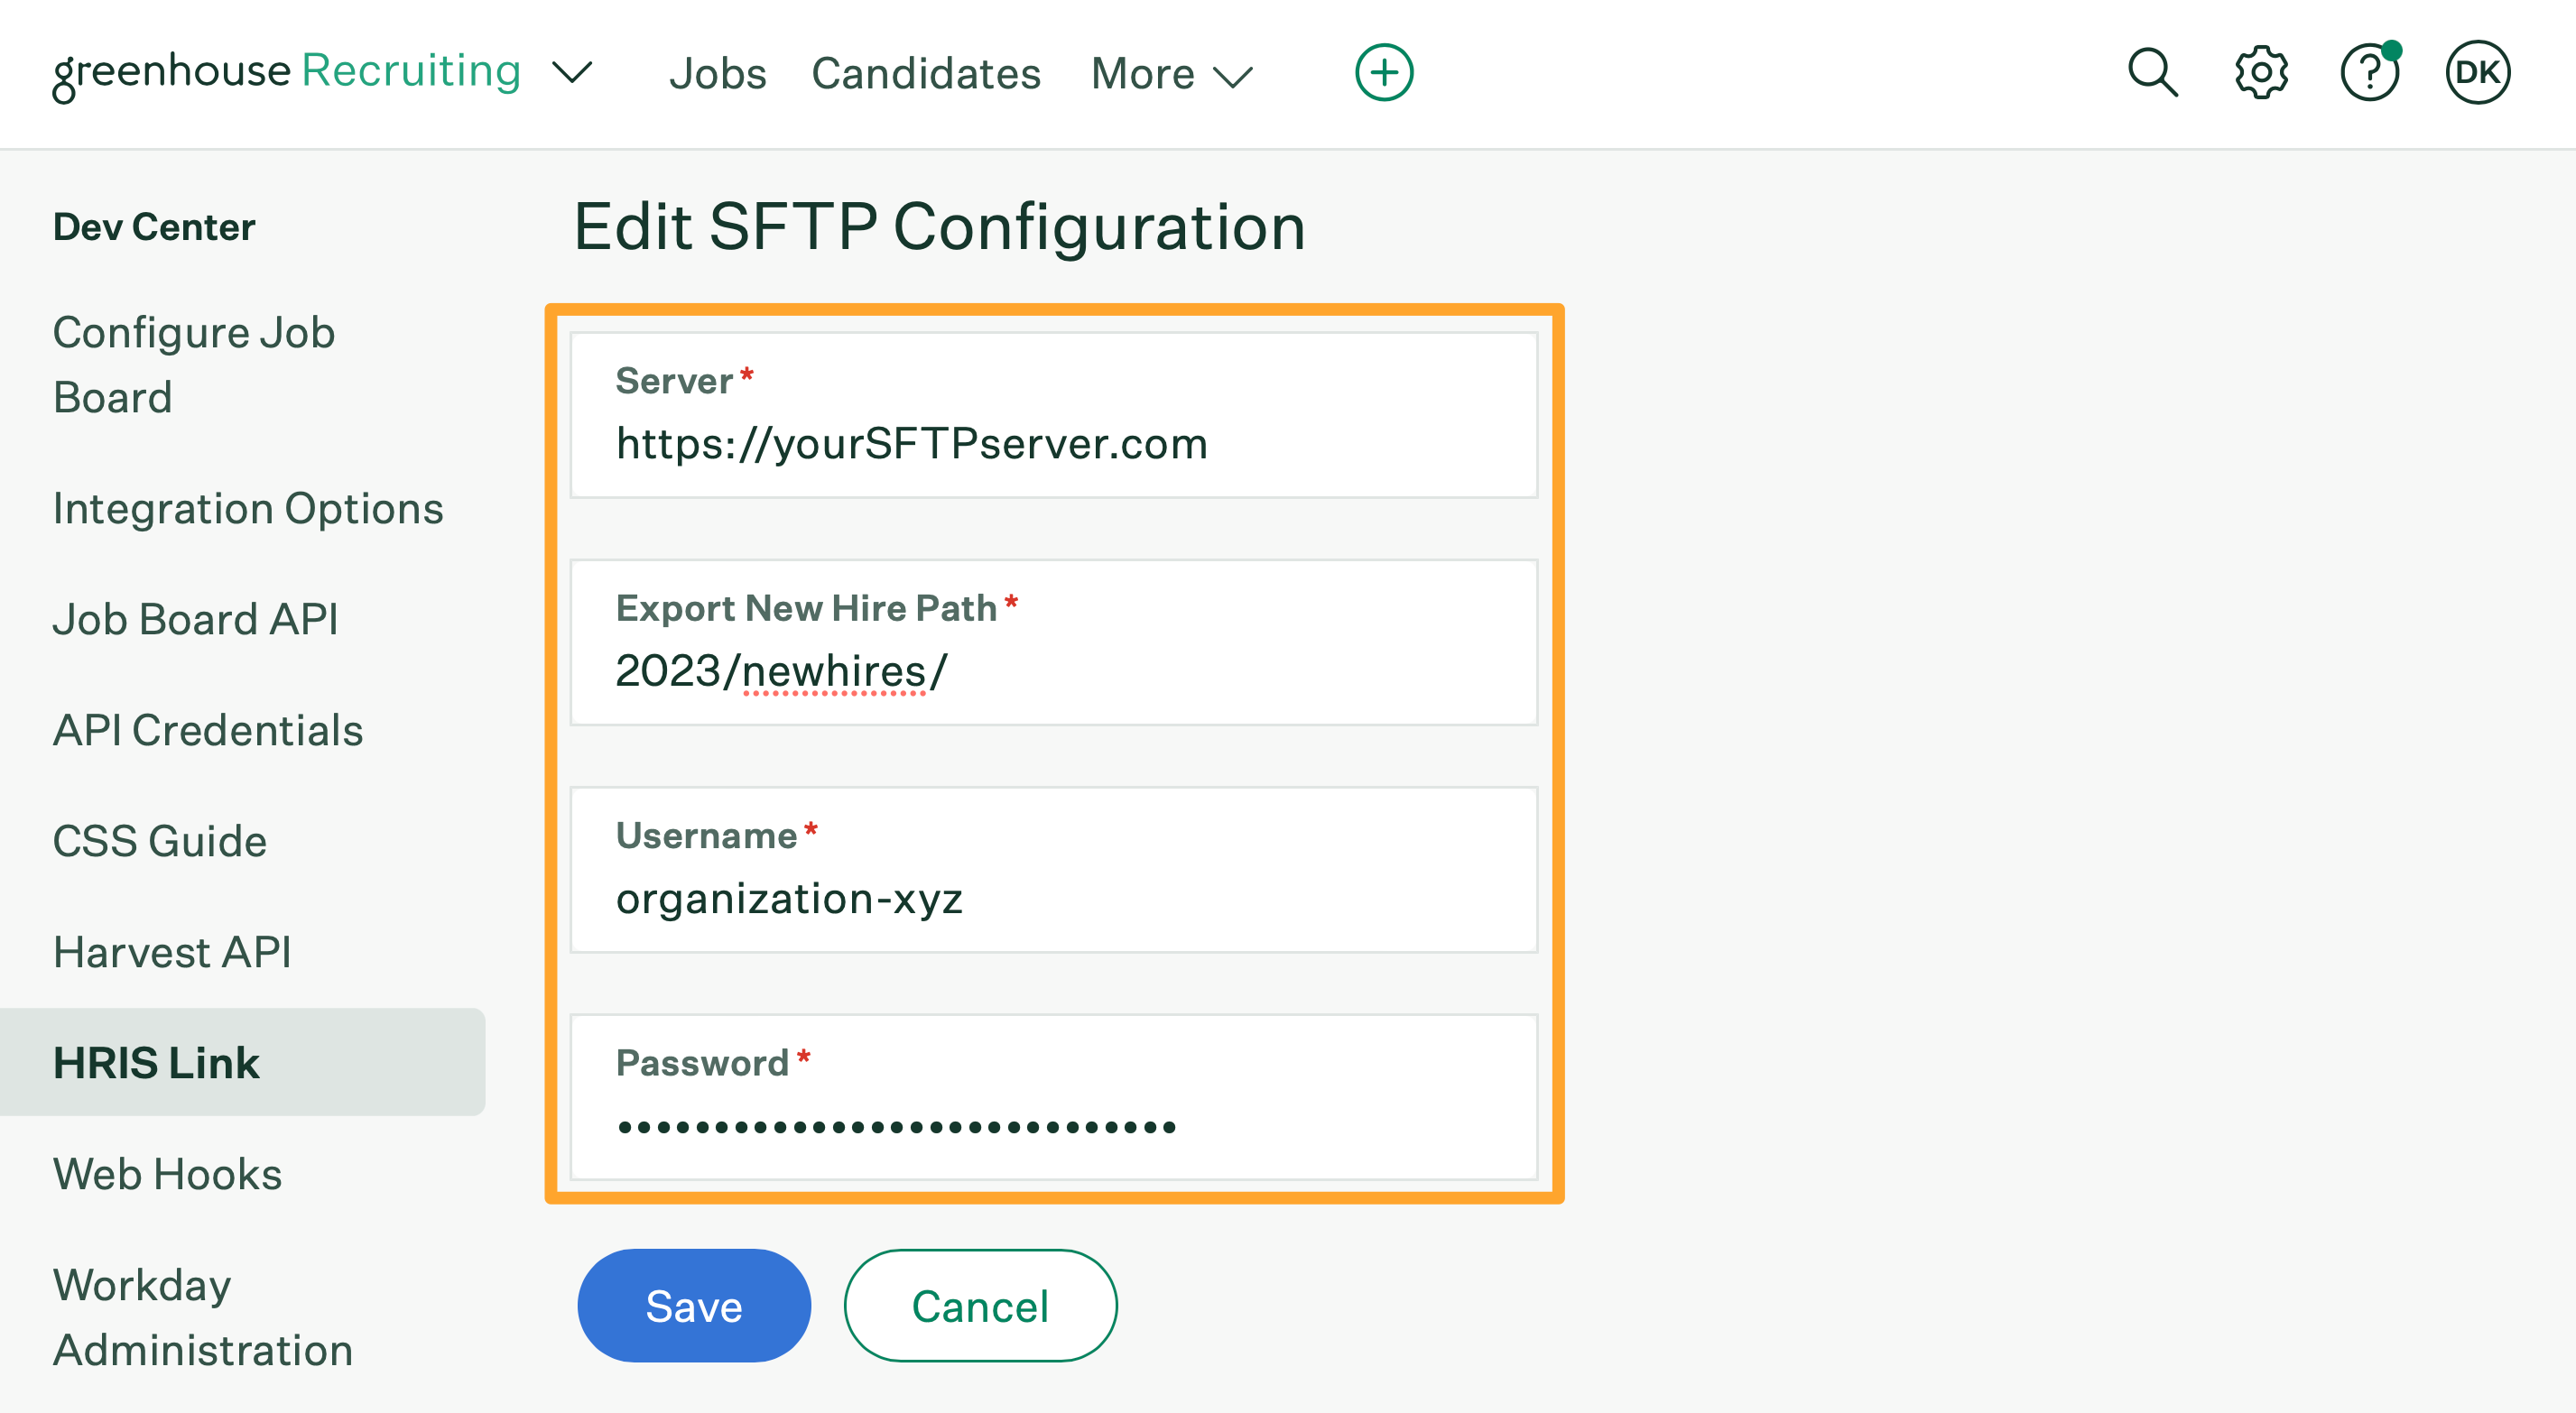 HRIS Link for hired candidates show example SFTP configuration settings